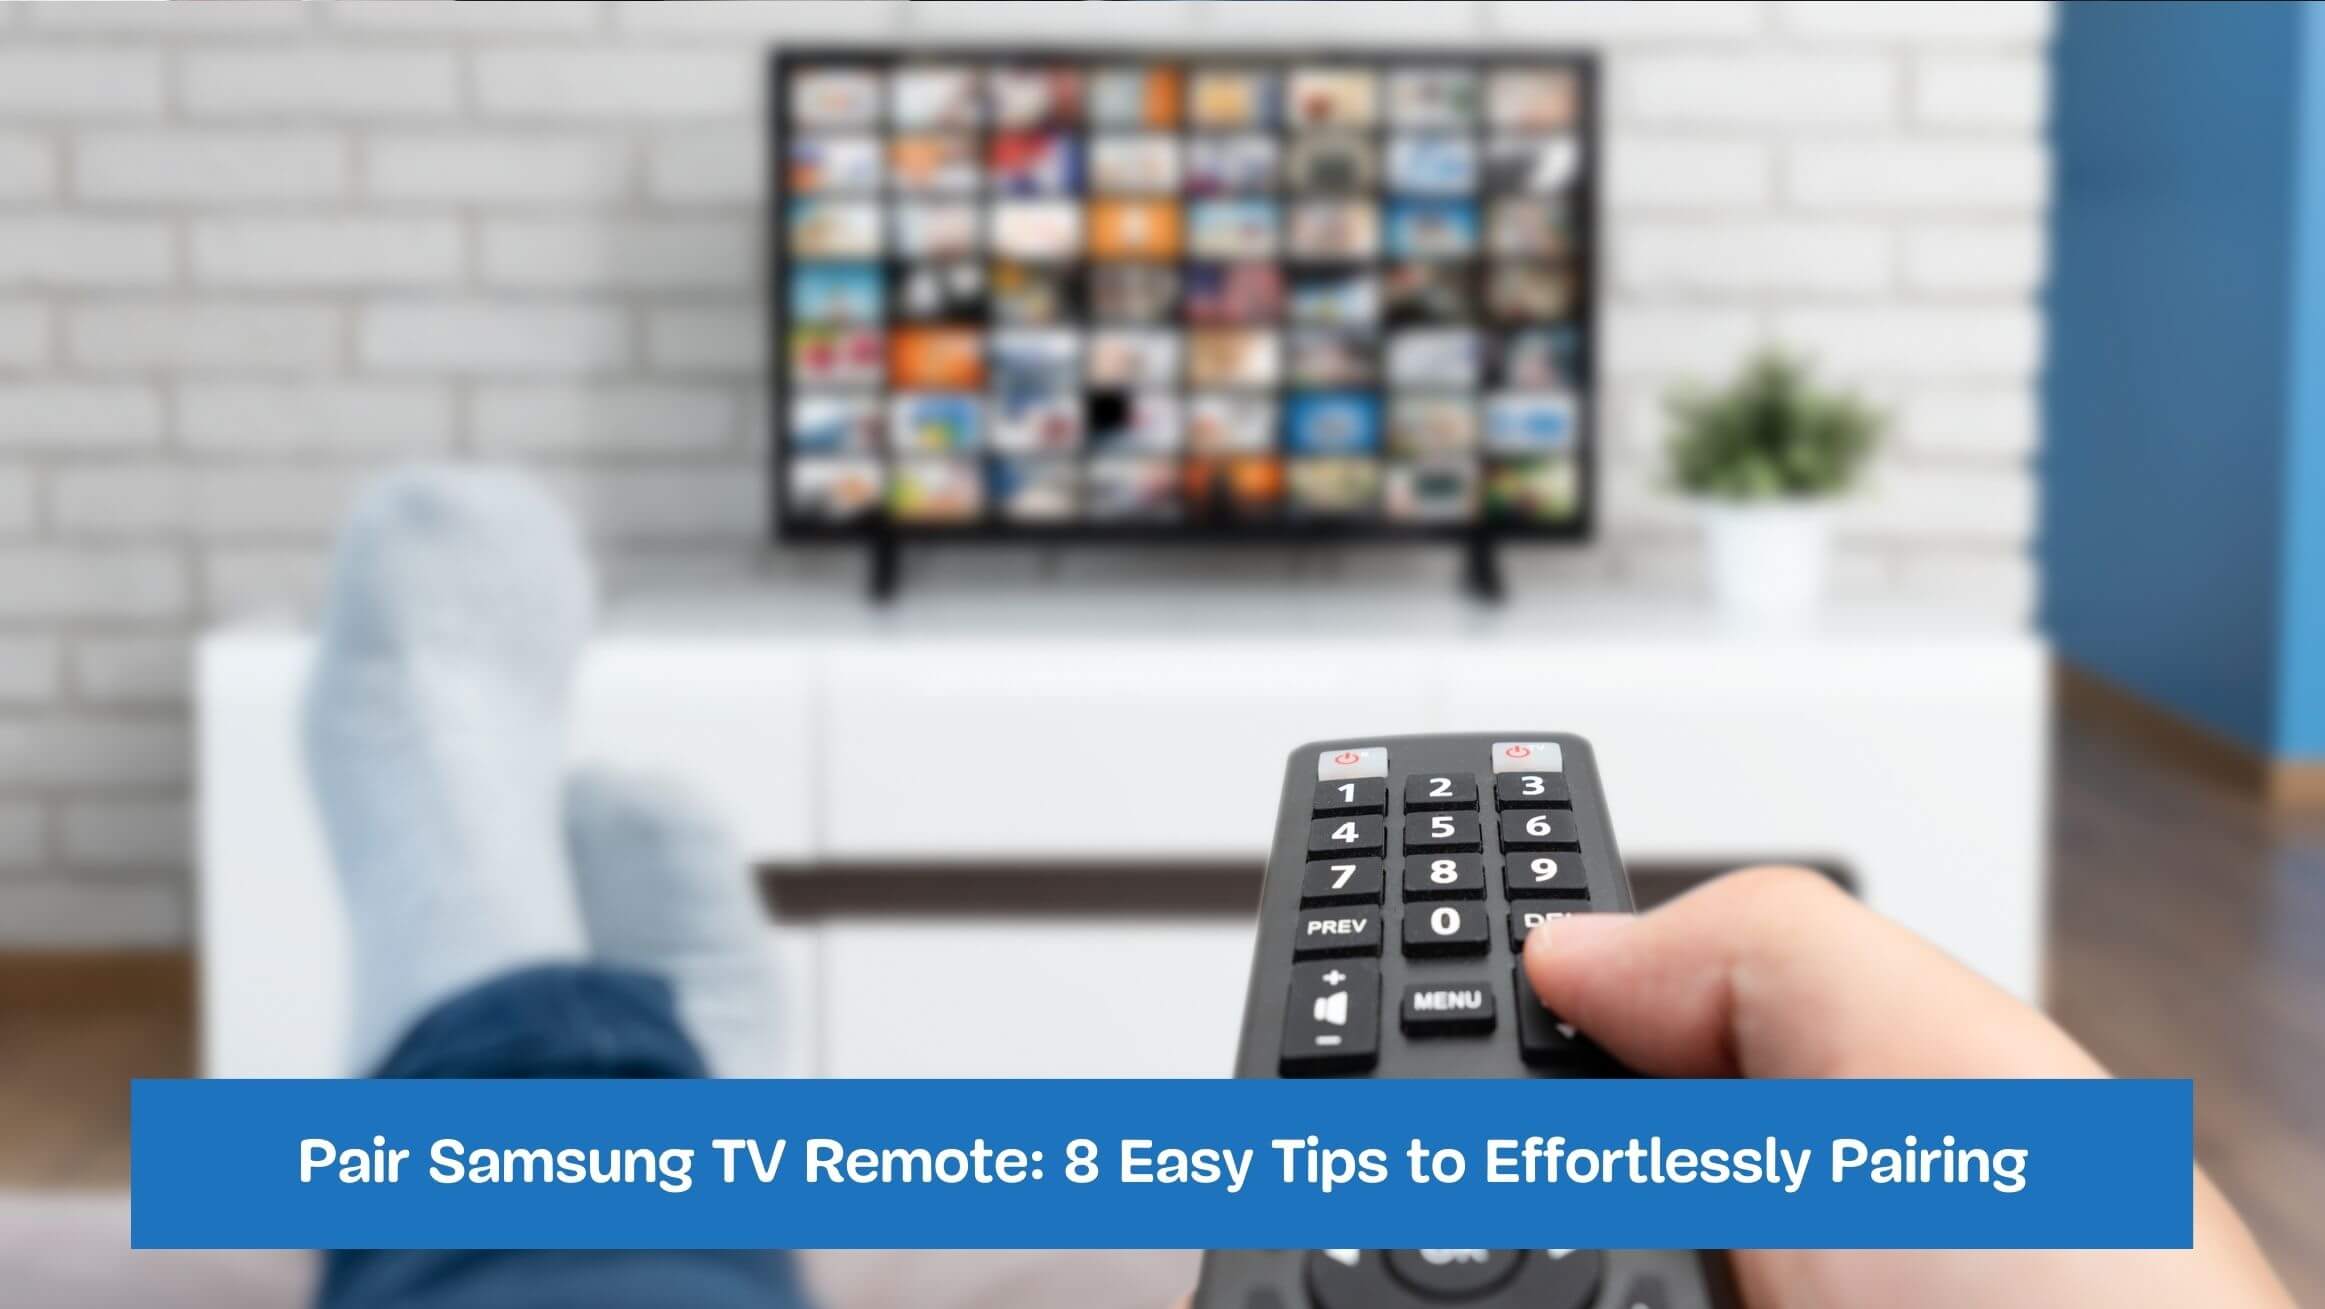 Pair Samsung TV Remote: 8 Easy Tips to Effortlessly Pairing